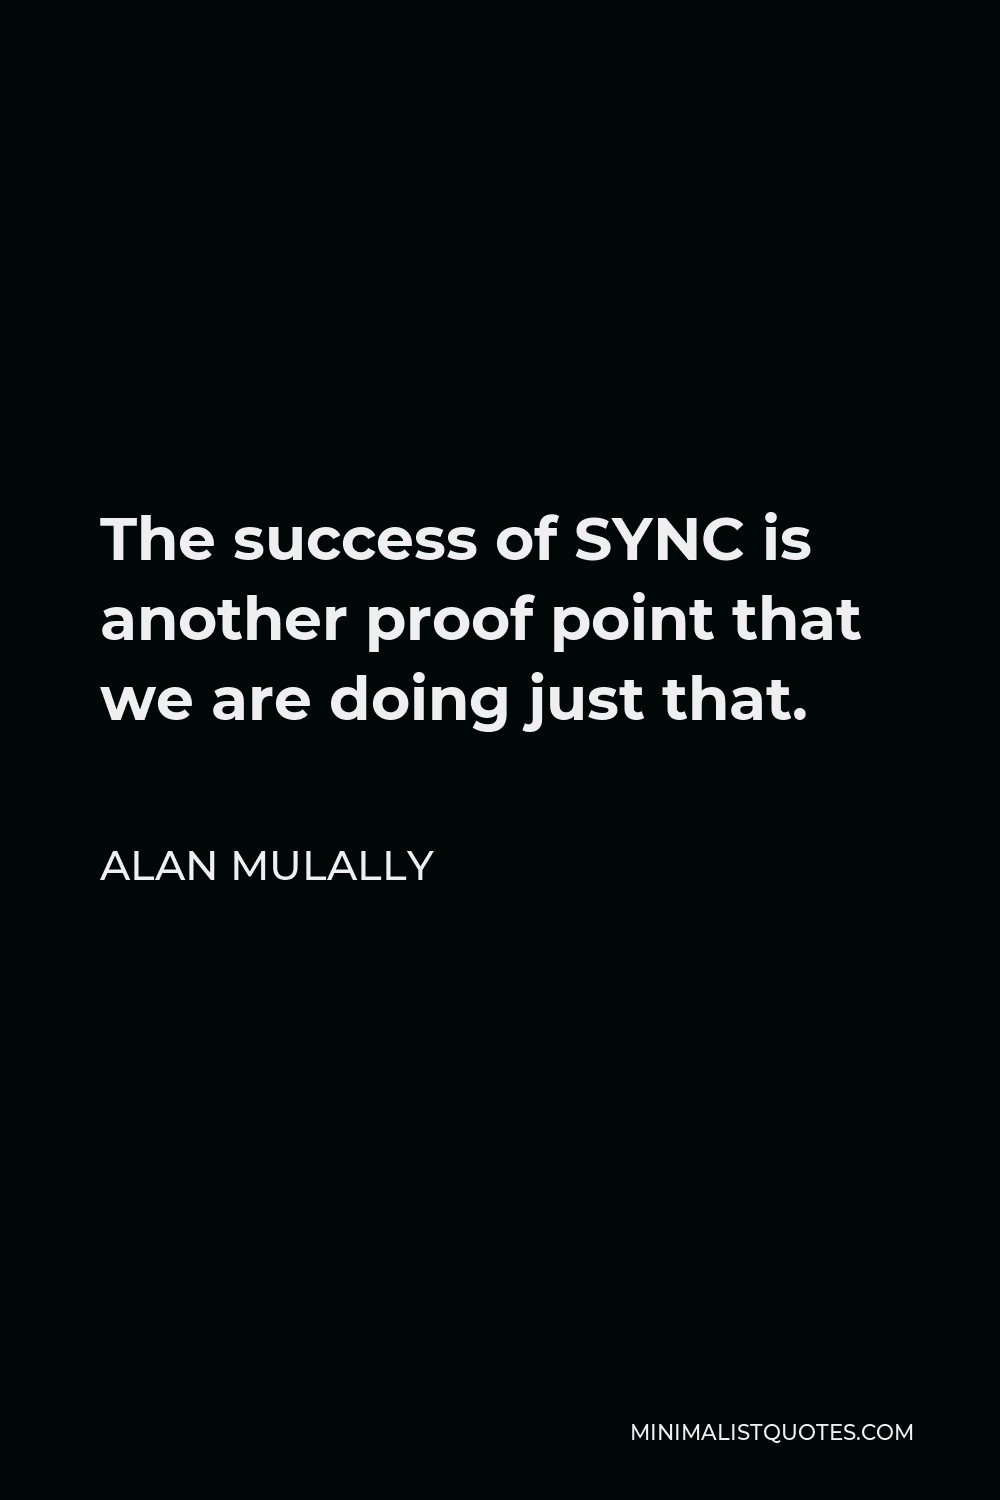 Alan Mulally Quote - The success of SYNC is another proof point that we are doing just that.